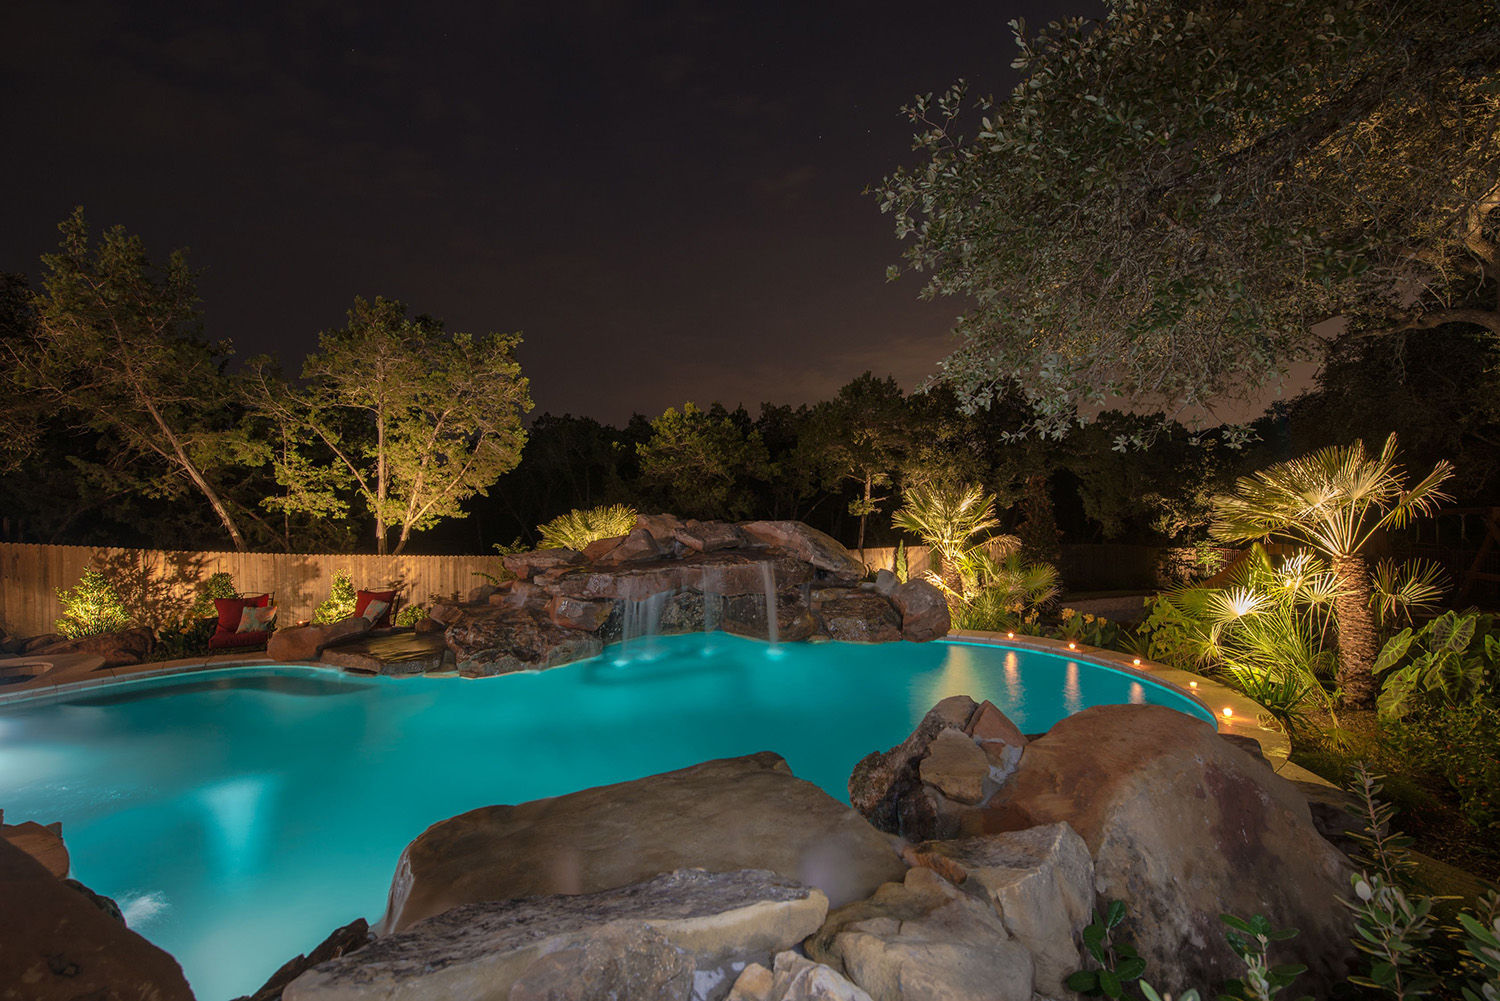 Automated technology and LED lighting make this custom pool stunning at night.